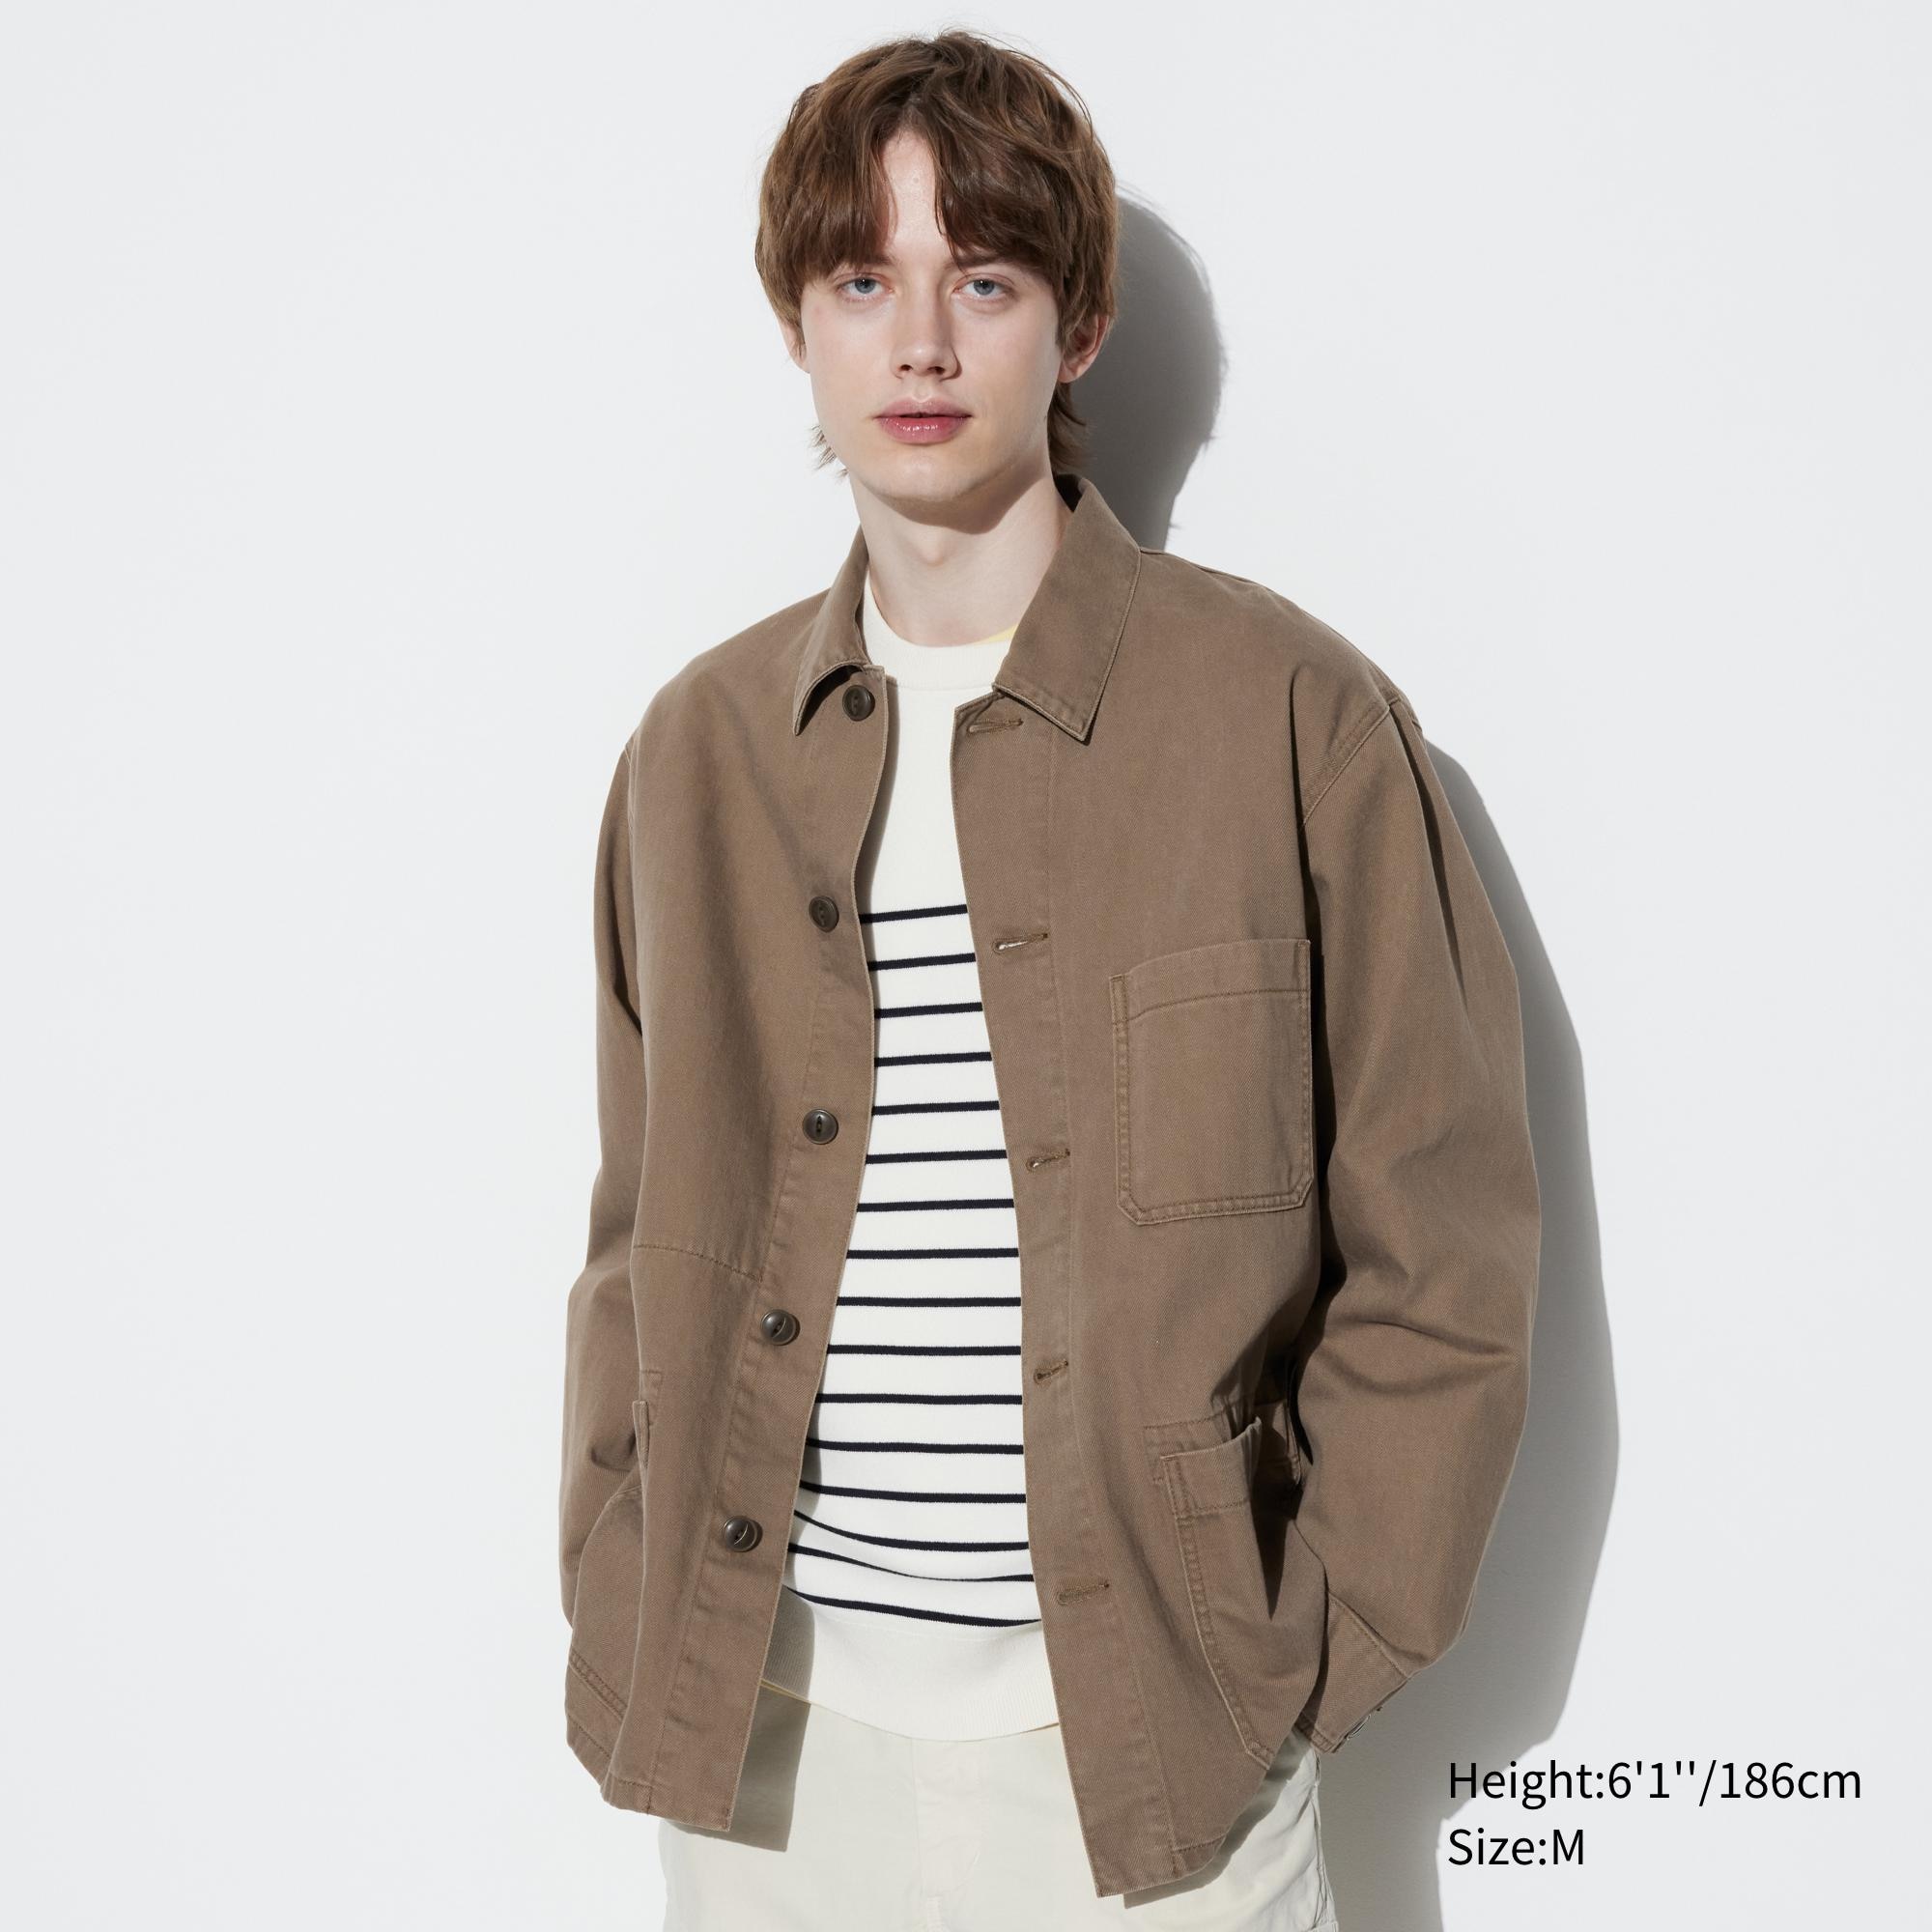 Check styling ideas for「Utility Jacket、HEATTECH Cotton Crew Neck